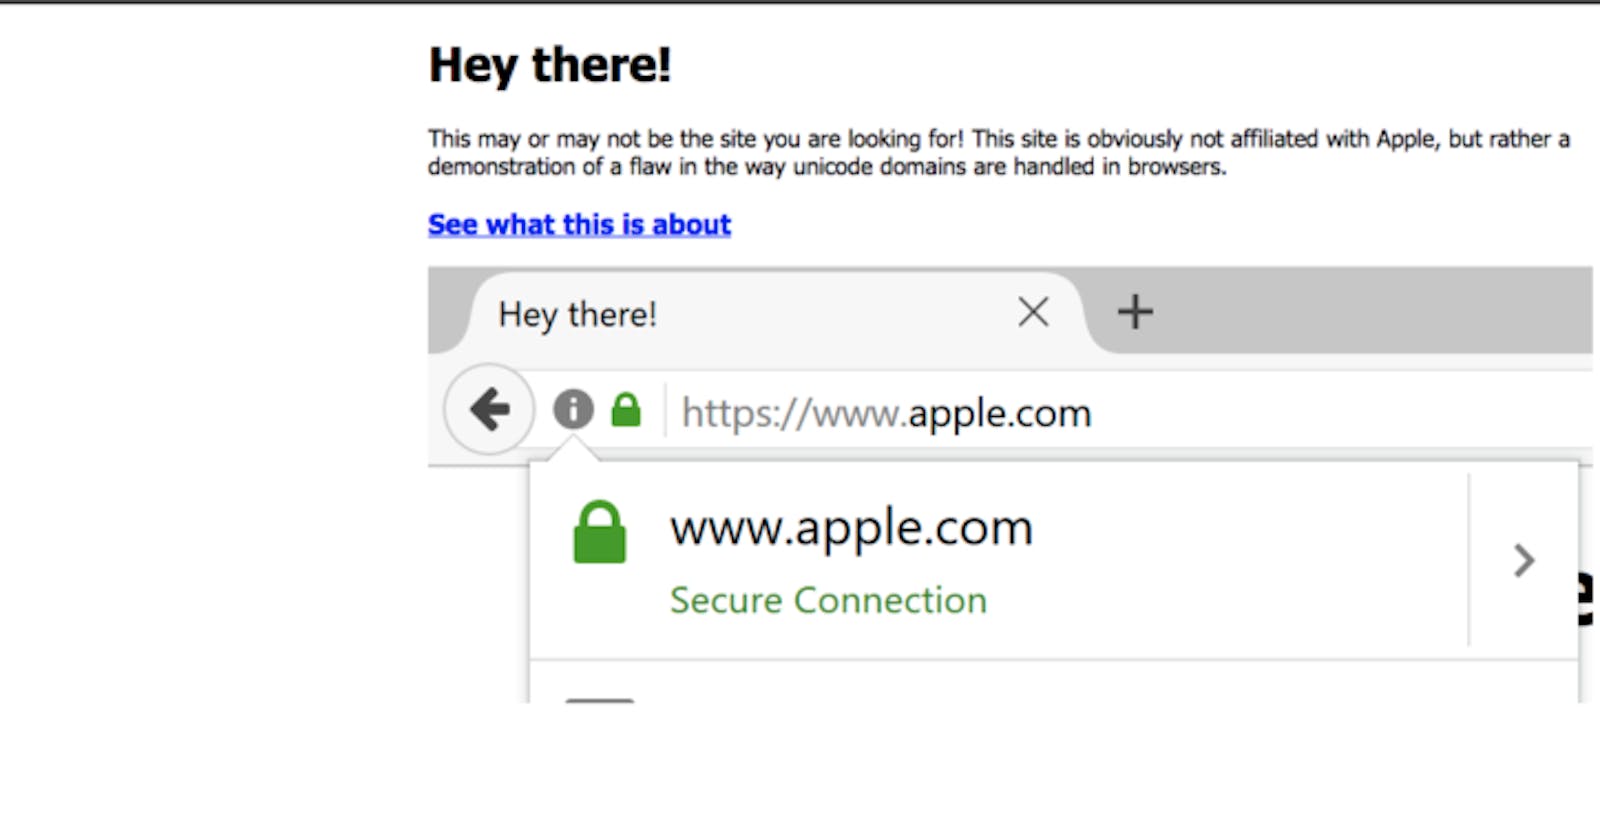 Chrome, Firefox, and Opera users beware: This isn't the apple.com you want